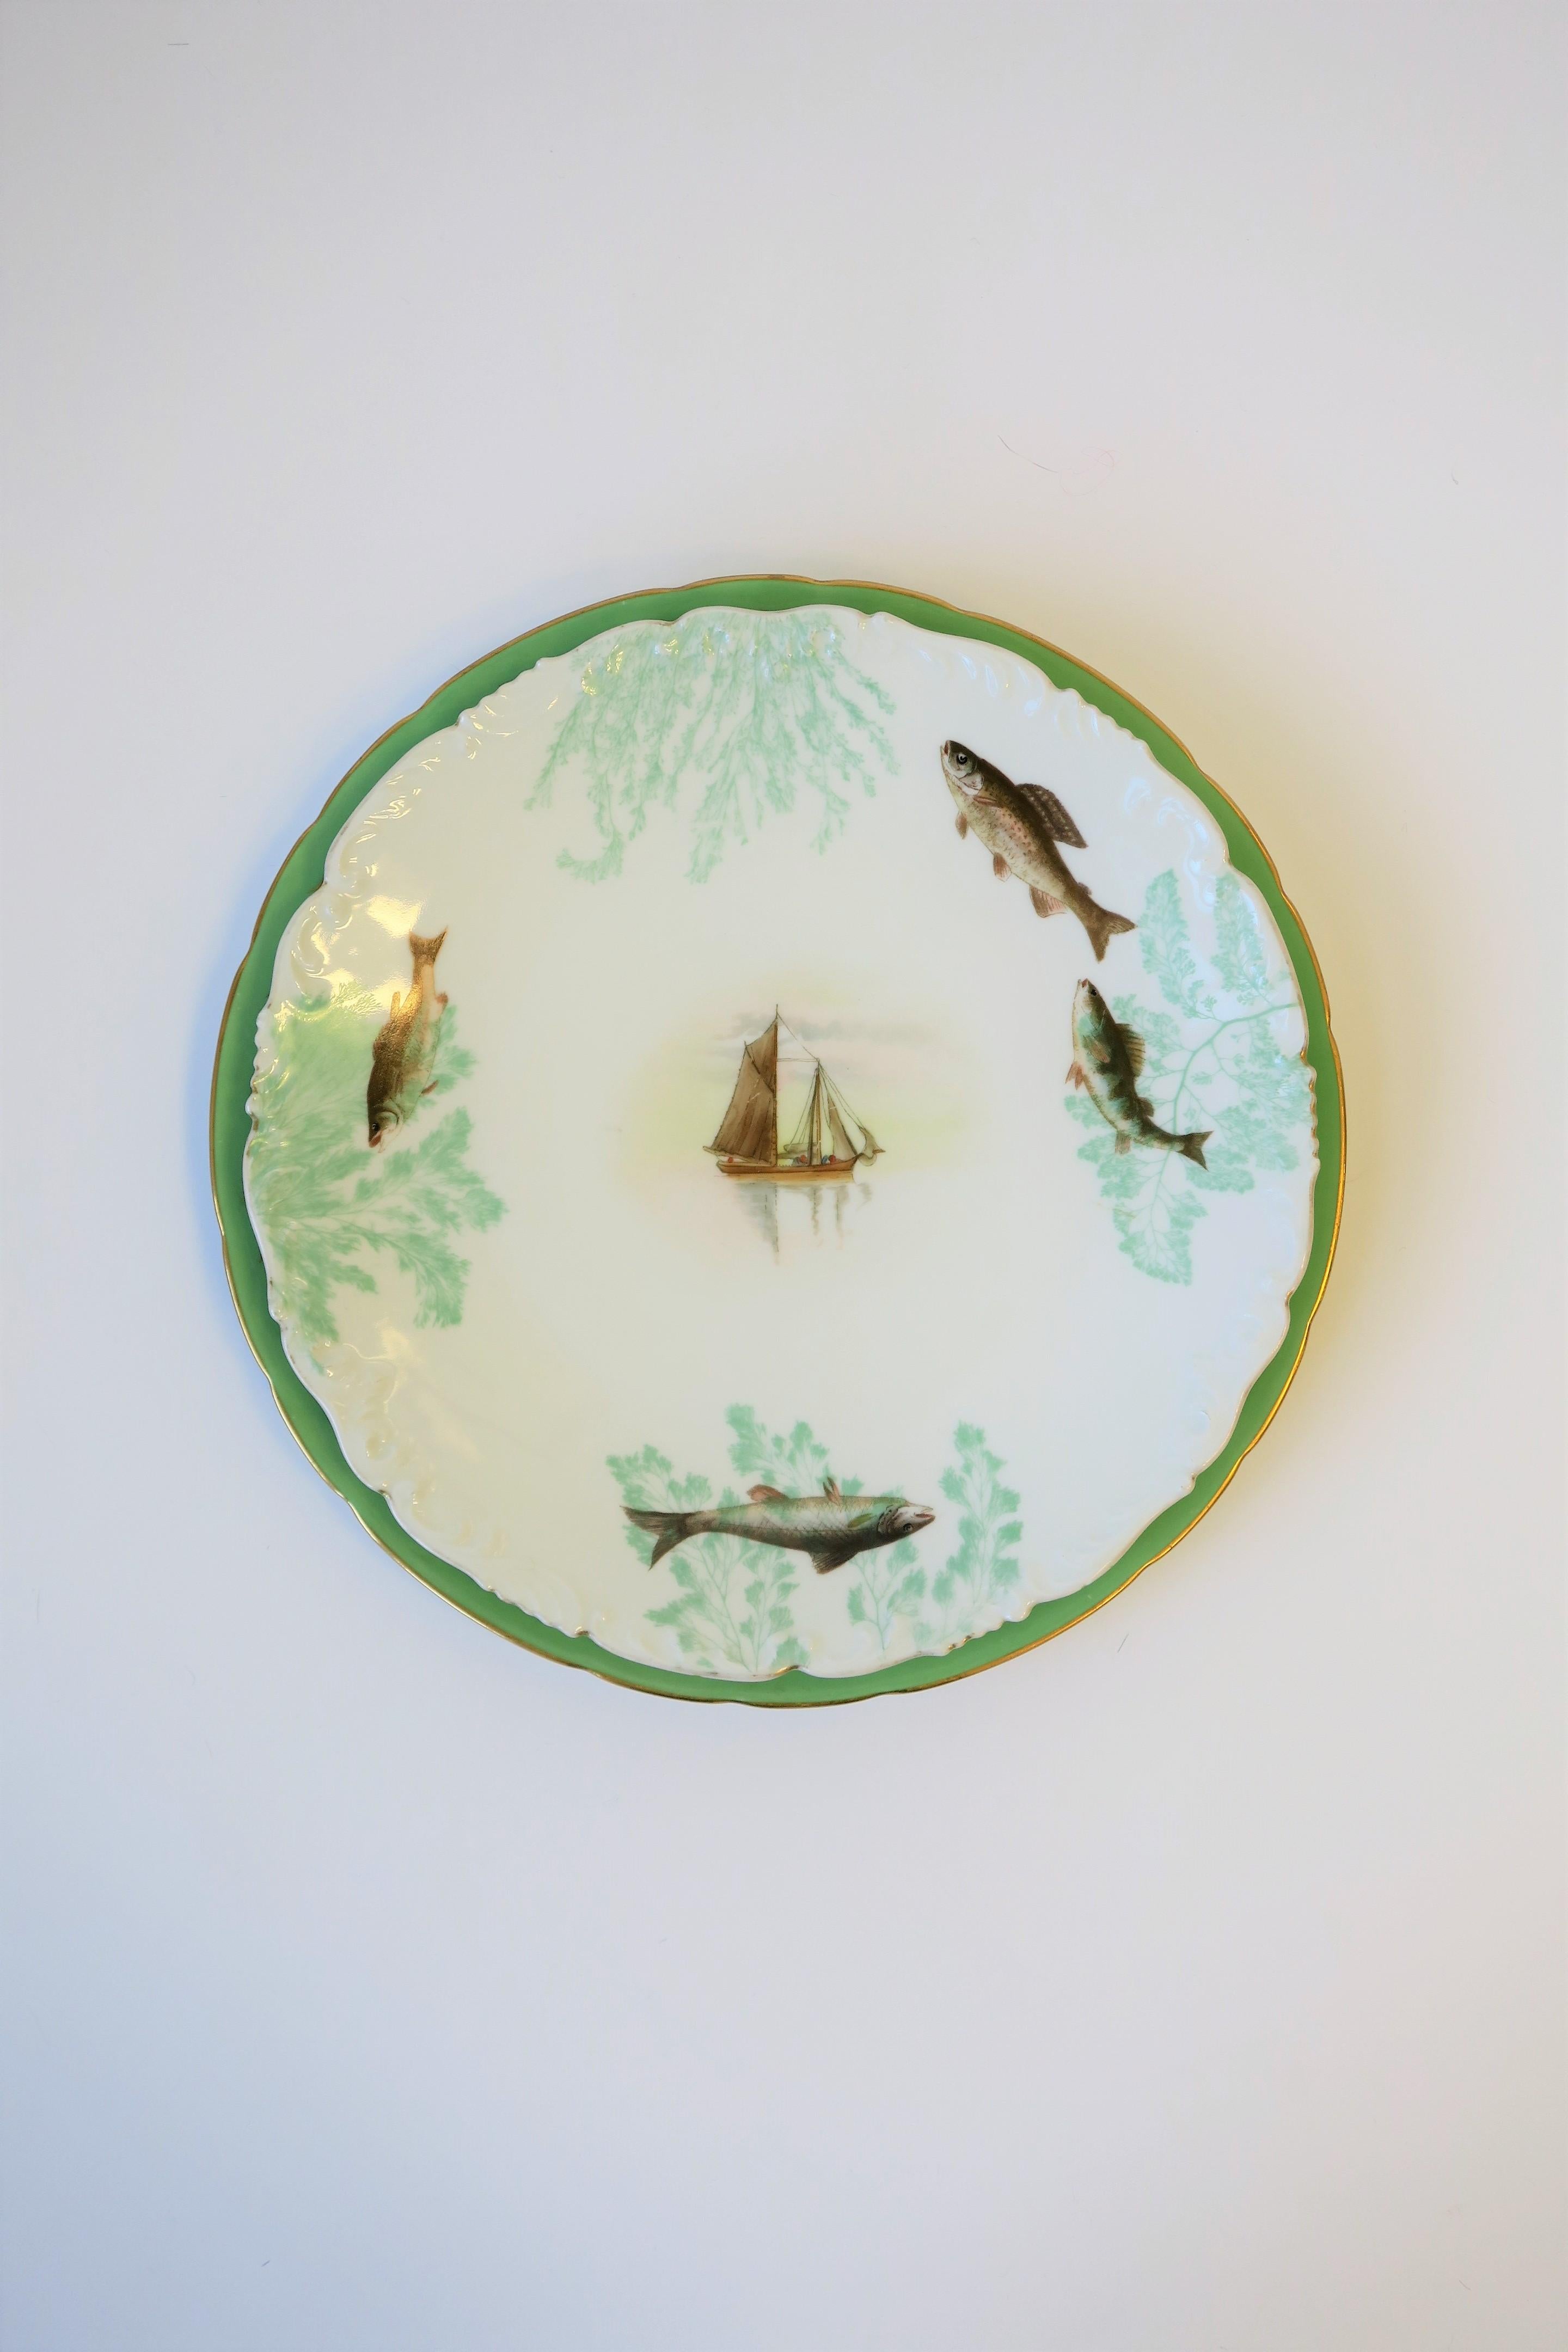 French Limoges Porcelain Dinner Plates with Rustic Fish & Boat Design, Set of 8 For Sale 13